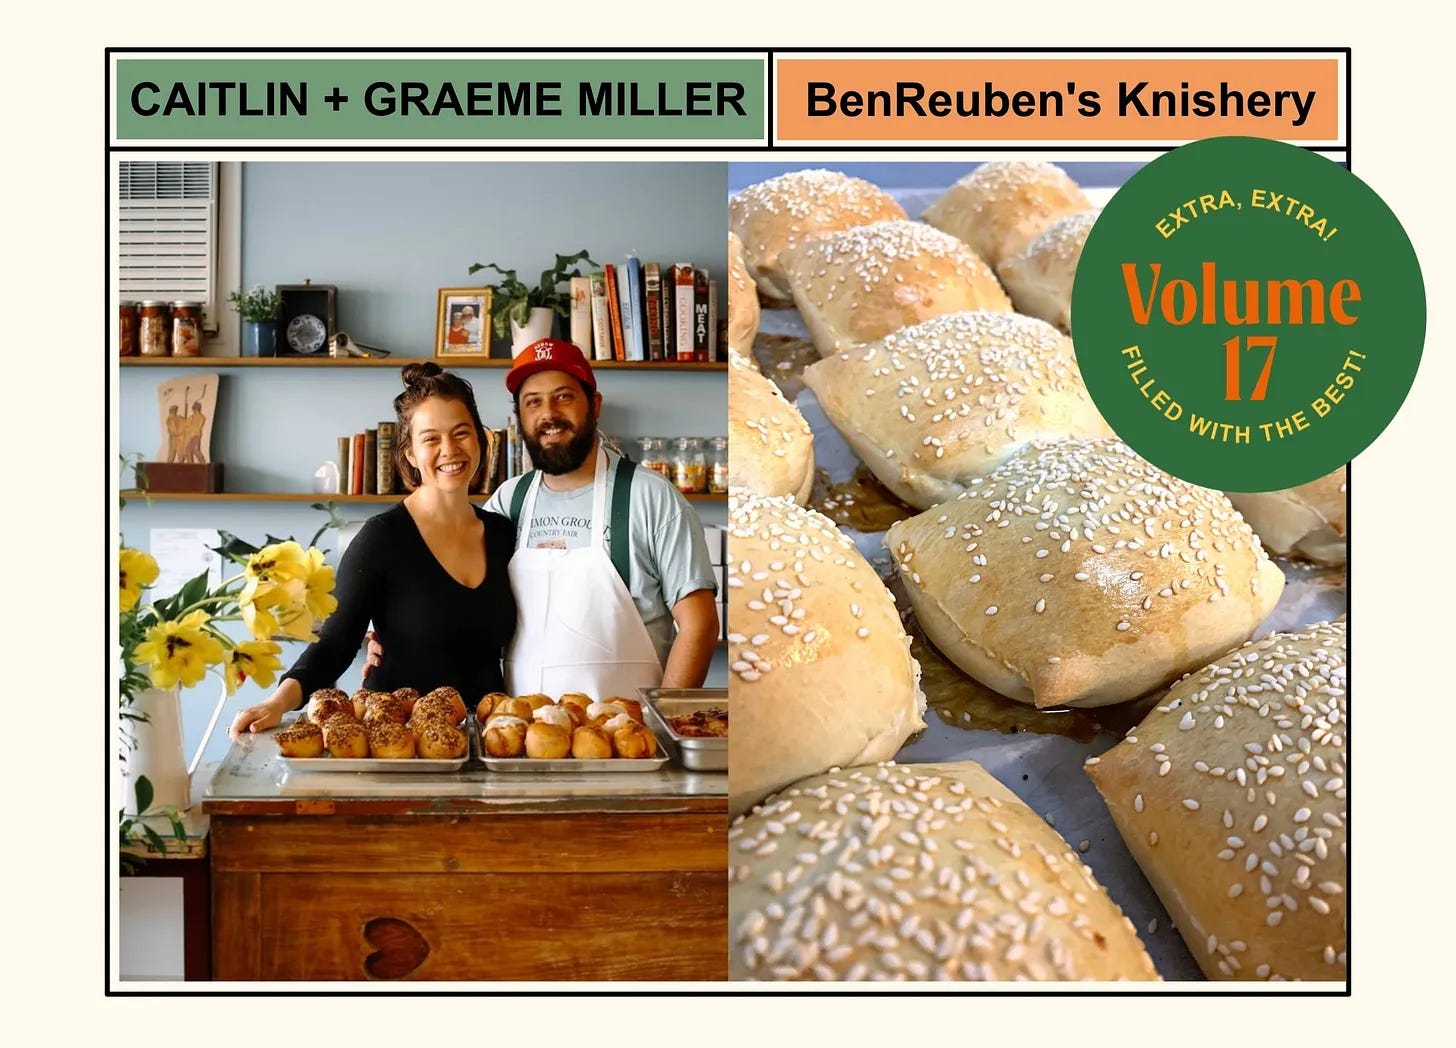 A graphic with an image of Caitlin and Graeme Miller in their knishery next to an image of their homemade knish